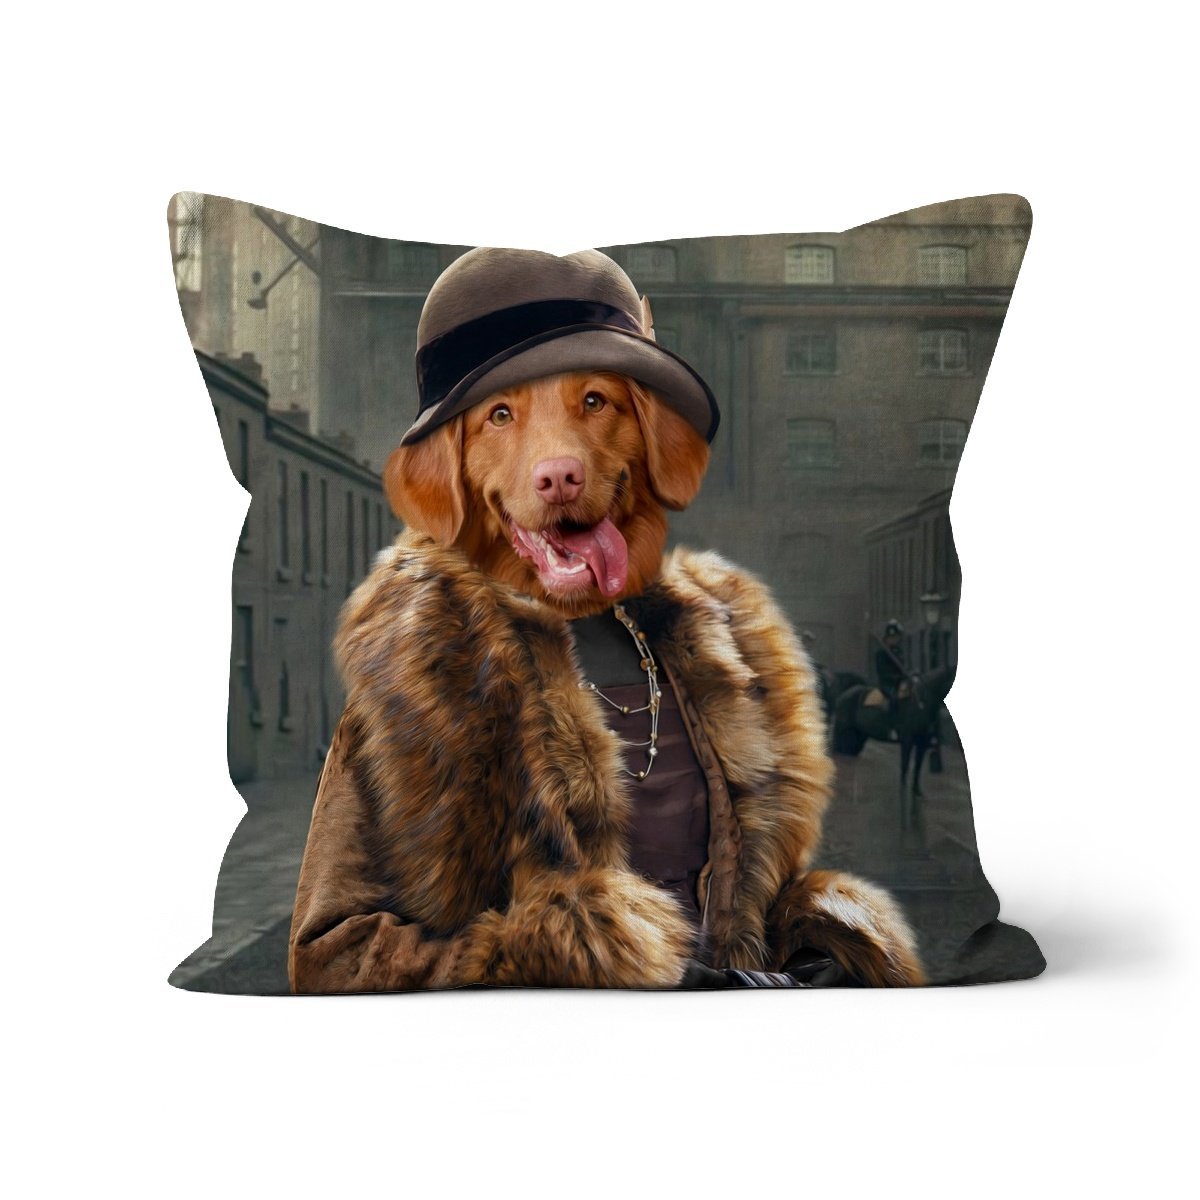 Peaky Blinders (Female): Custom Pet Cushion - Paw & Glory - #pet portraits# - #dog portraits# - #pet portraits uk#paw and glory, custom pet portrait cushion,pet face pillows, pillow personalized, dog personalized pillow, pillow with pet picture, dog pillows personalized